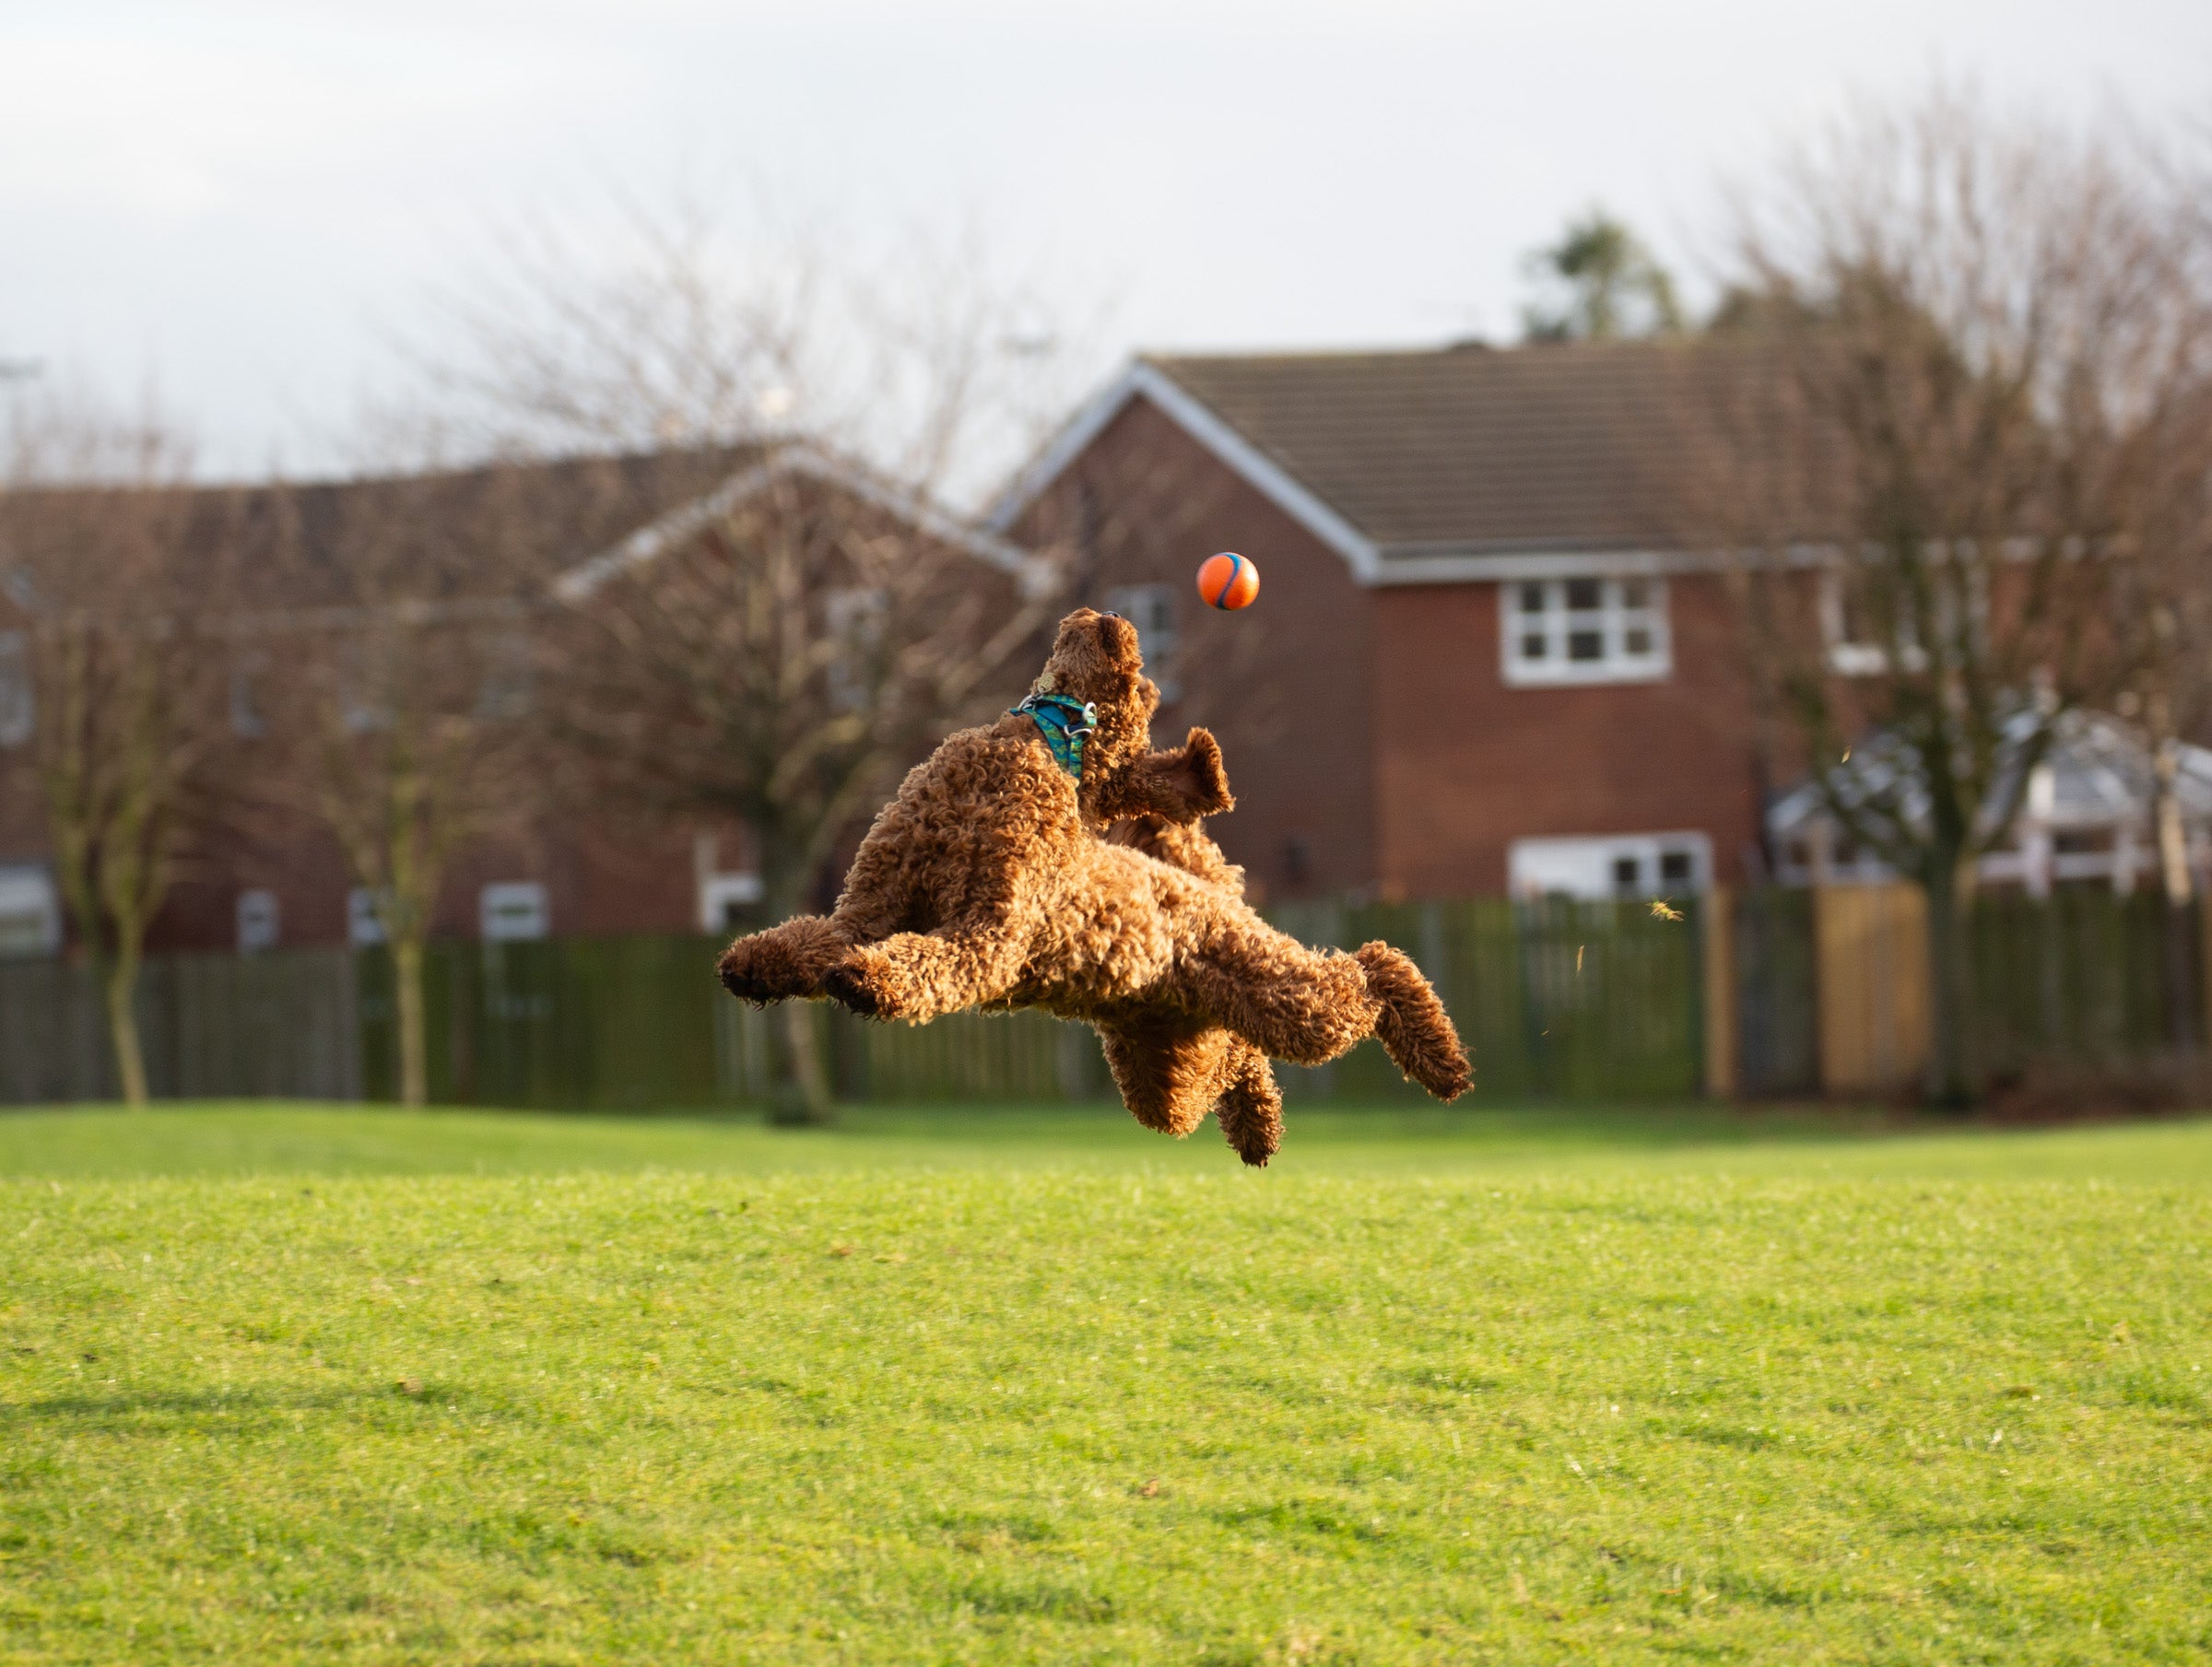 a dog leaps across a field trying to catch a ball